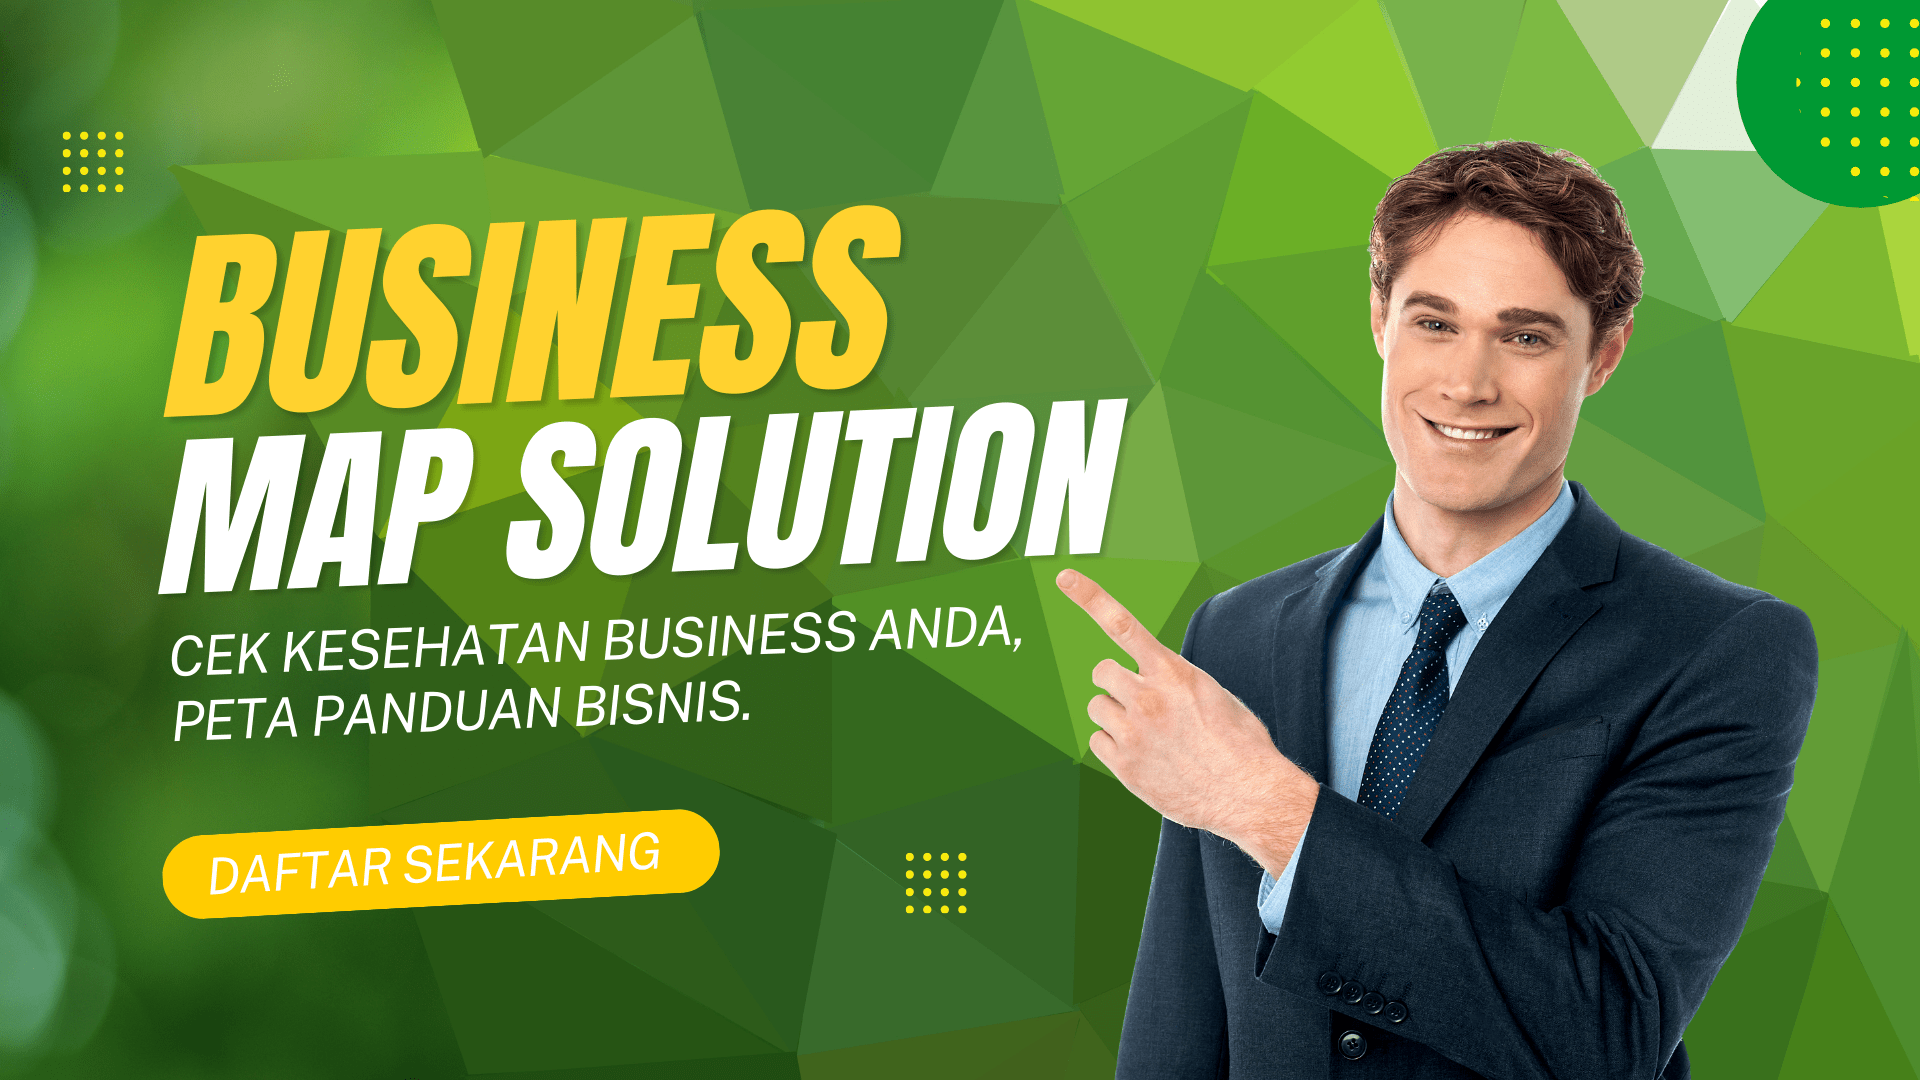 BUSINESS MAP SOLUTION